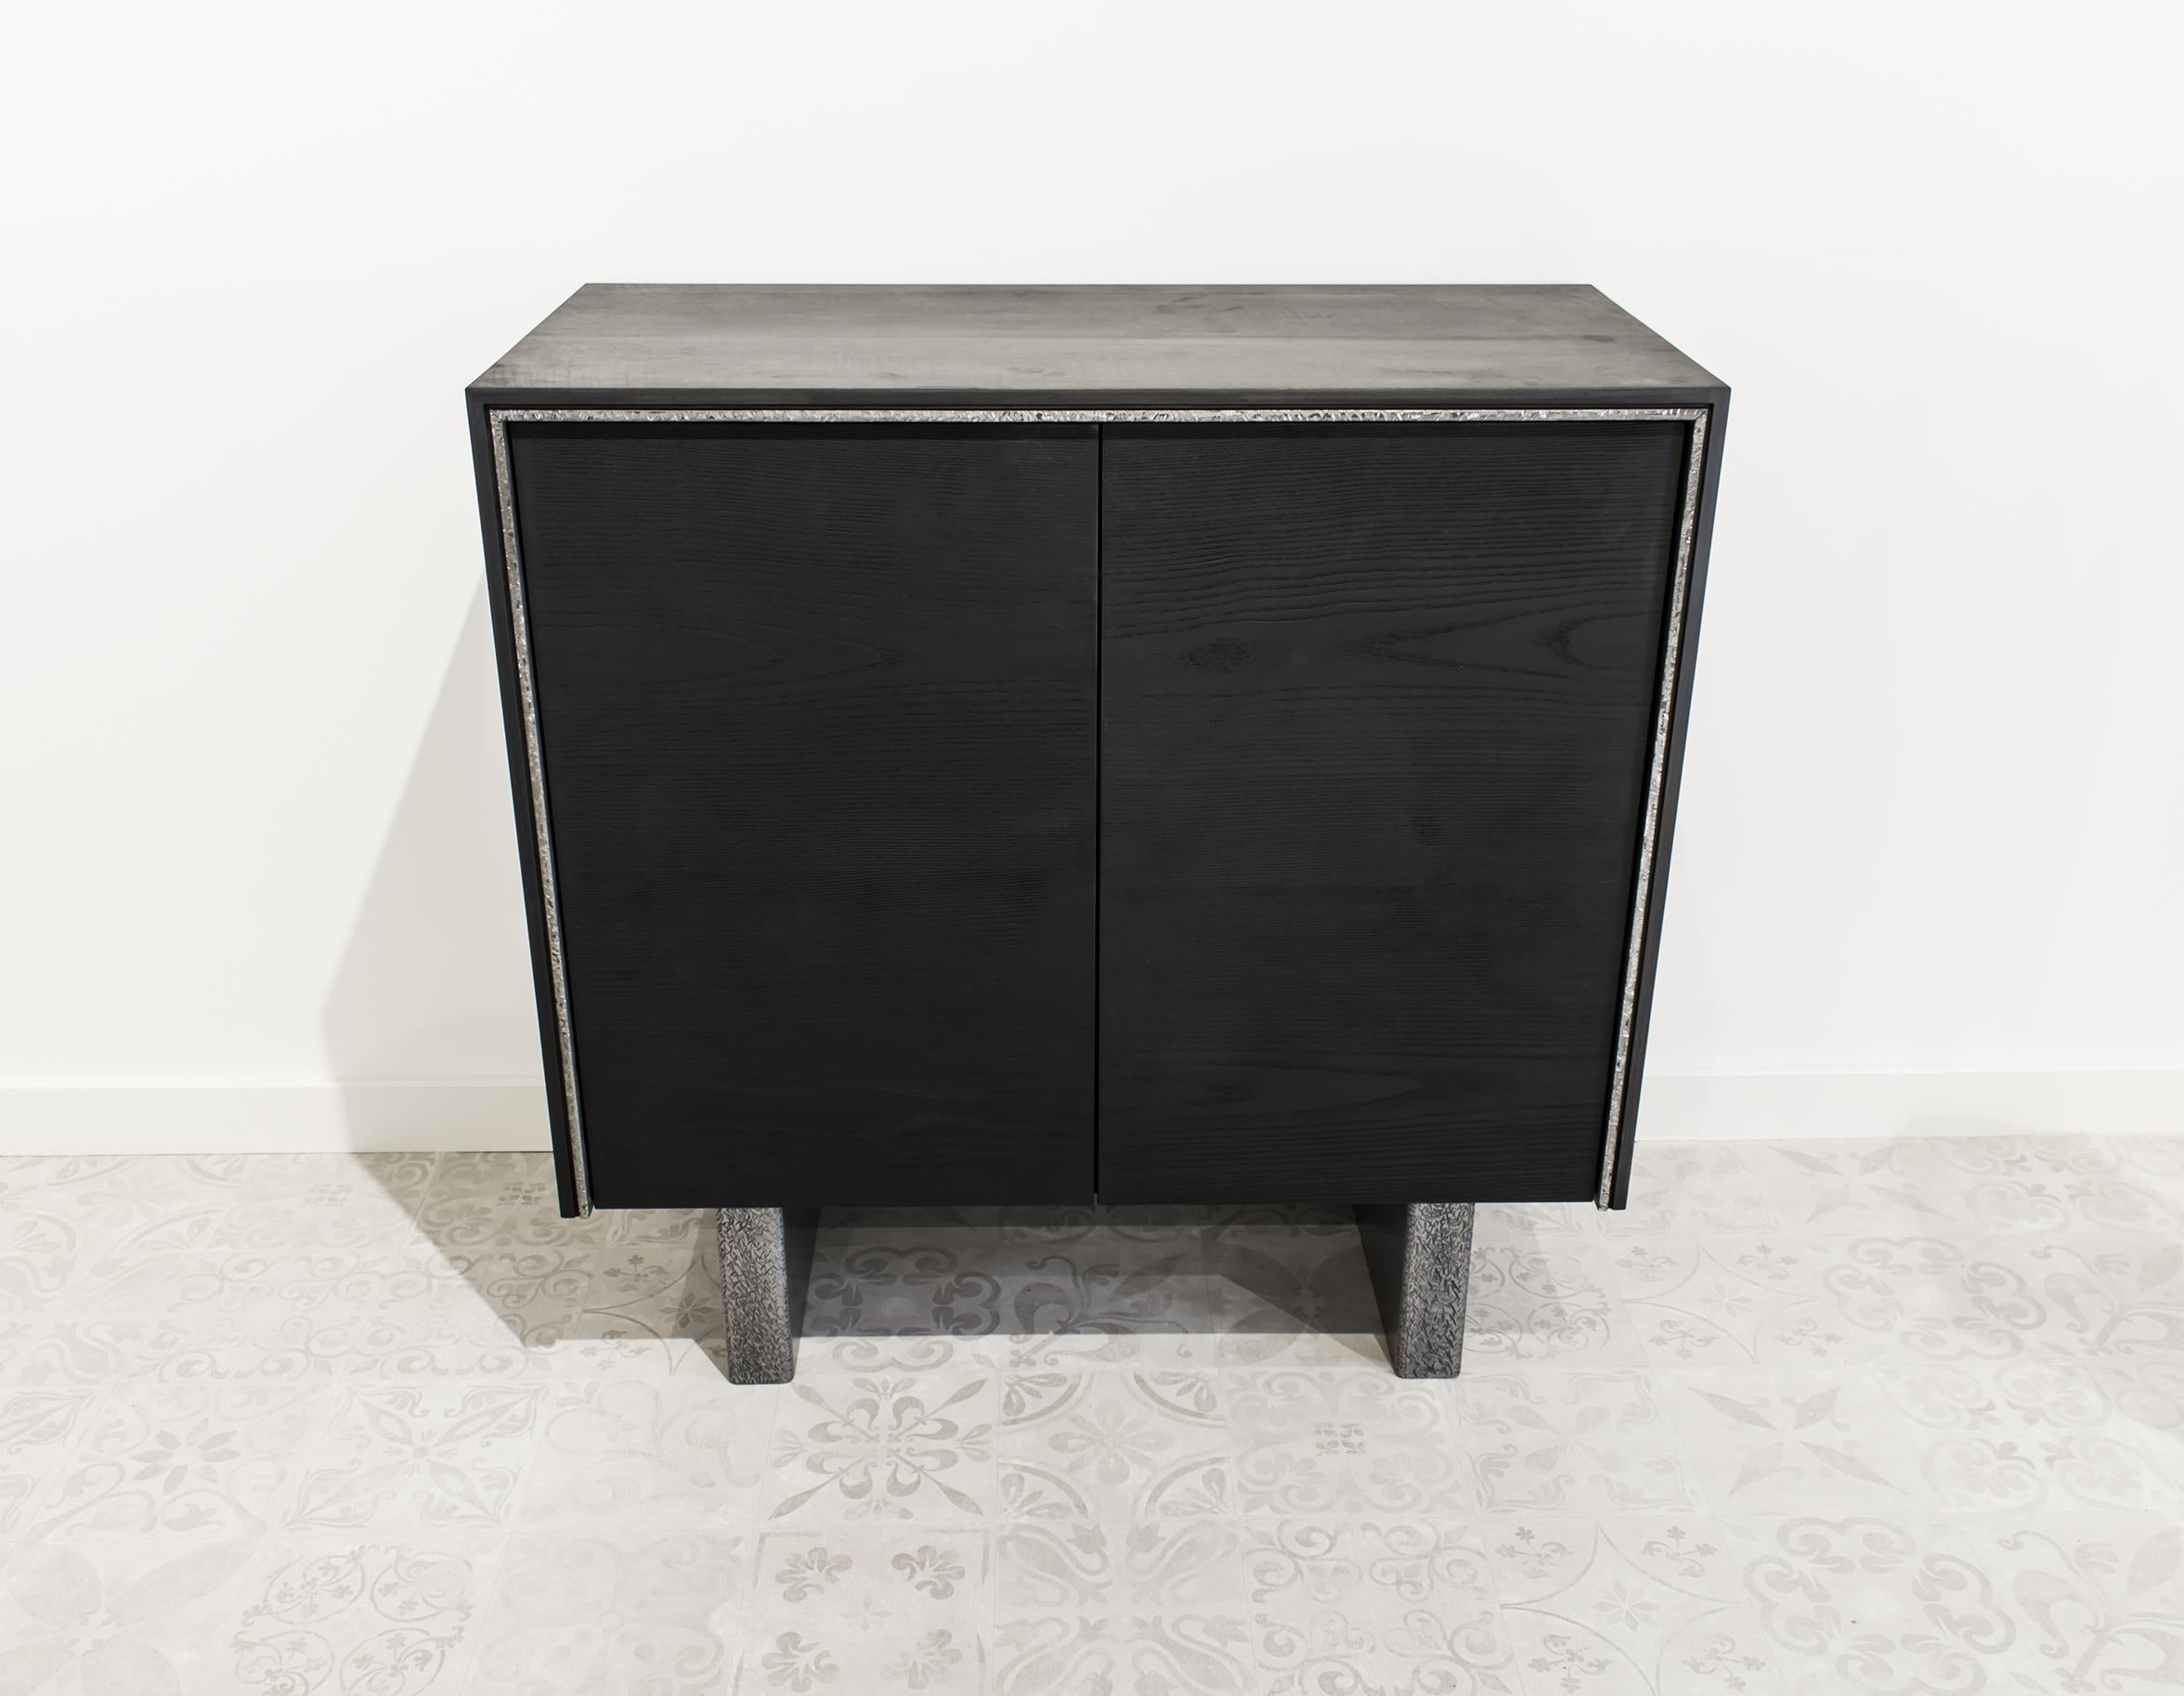 Buffet made entirely of solid ash, features two doors with hammered steel accents. The doors open to reveal three shelves in rare curly ash. An elegant silhouette with perfect dimensions for any home (90 cm wide with a height of 90 cm). This new